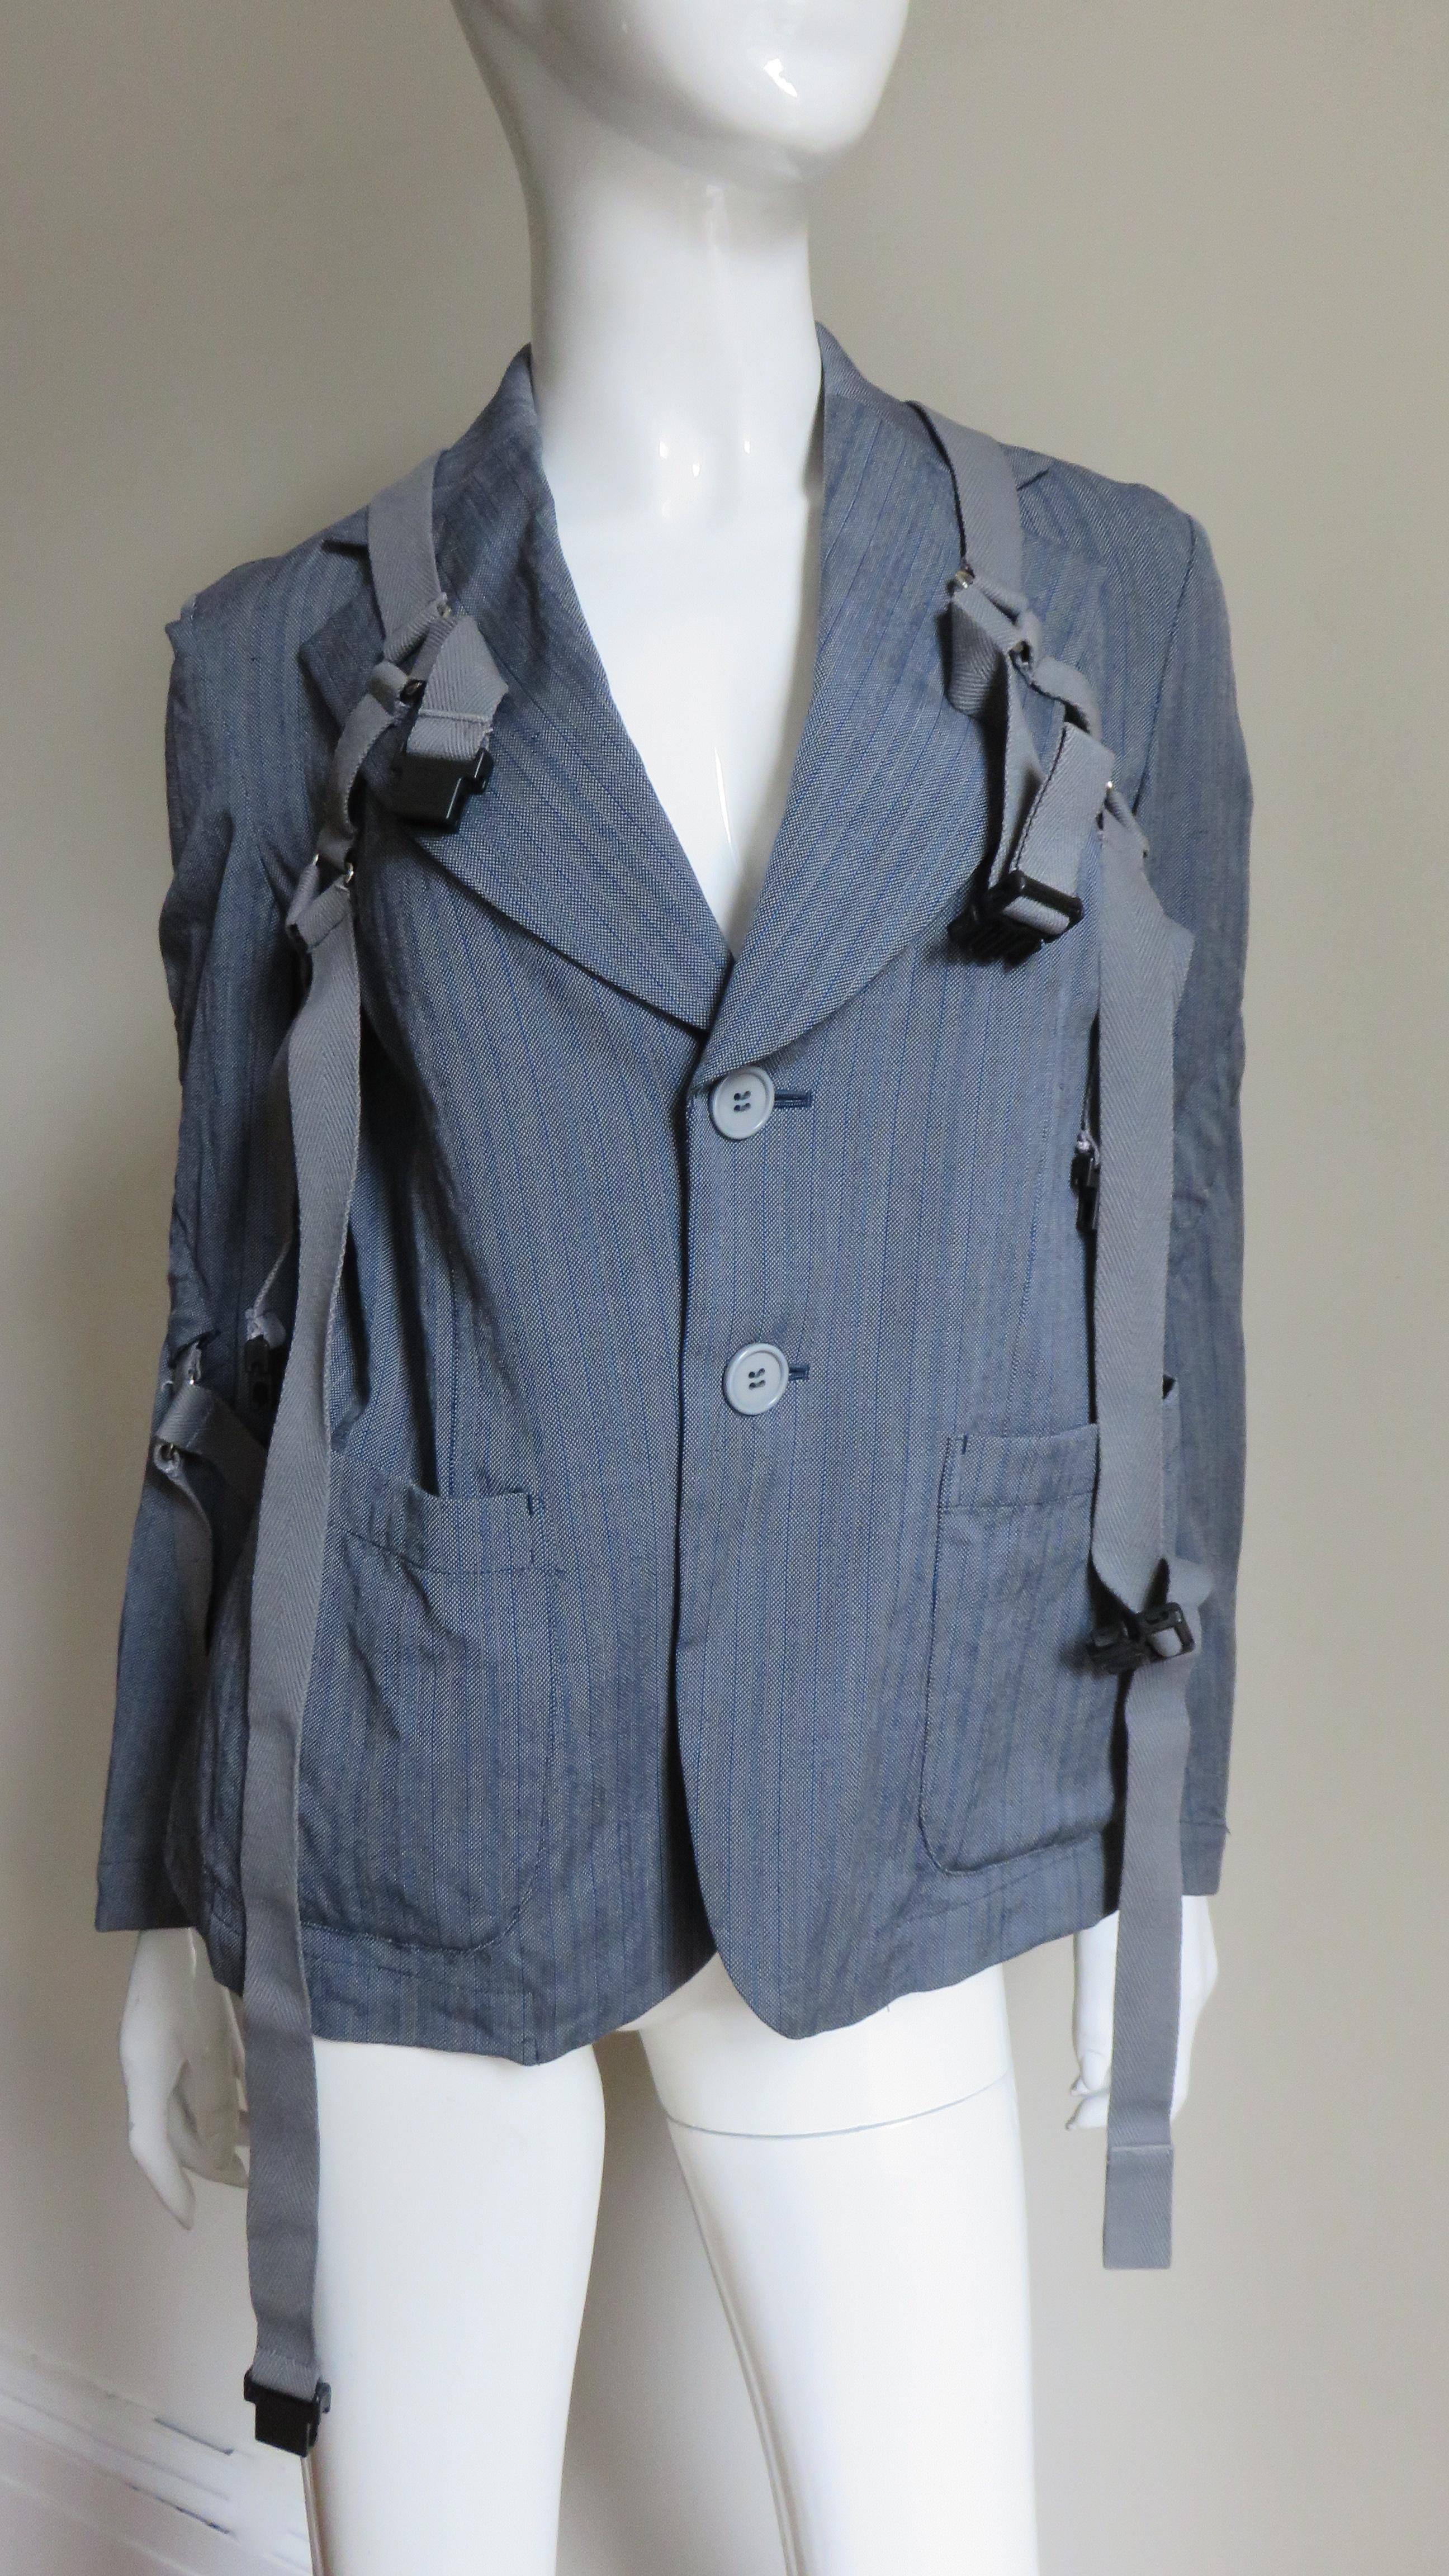 Comme des Garcons Jacket with Straps AD 2002 In Excellent Condition For Sale In Water Mill, NY